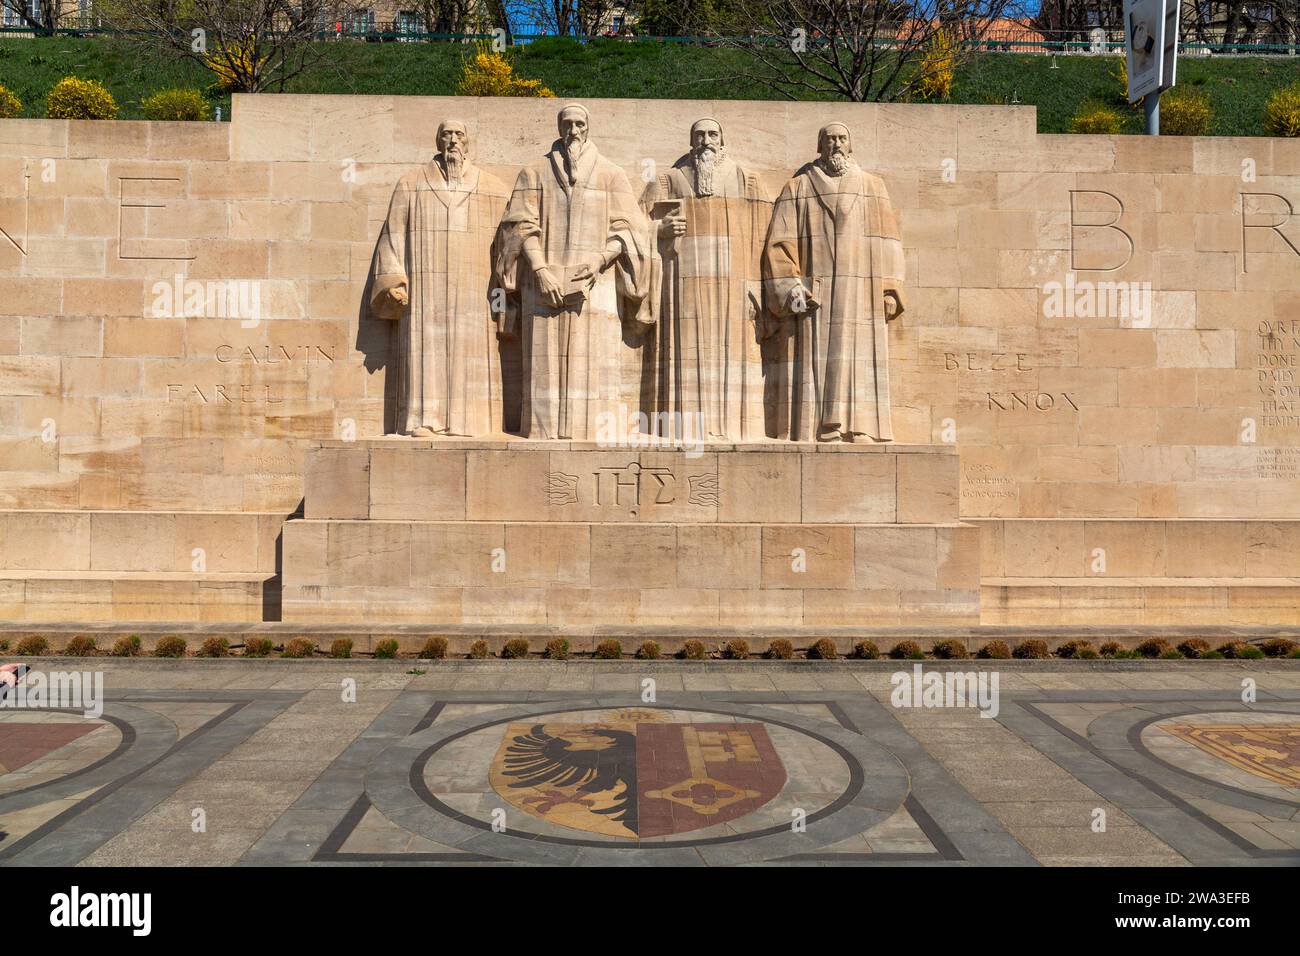 Geneva, Switzerland - 24 March 2022: The International Monument to the Reformation, usually known as the Reformation Wall was inaugurated in 1909 in G Stock Photo